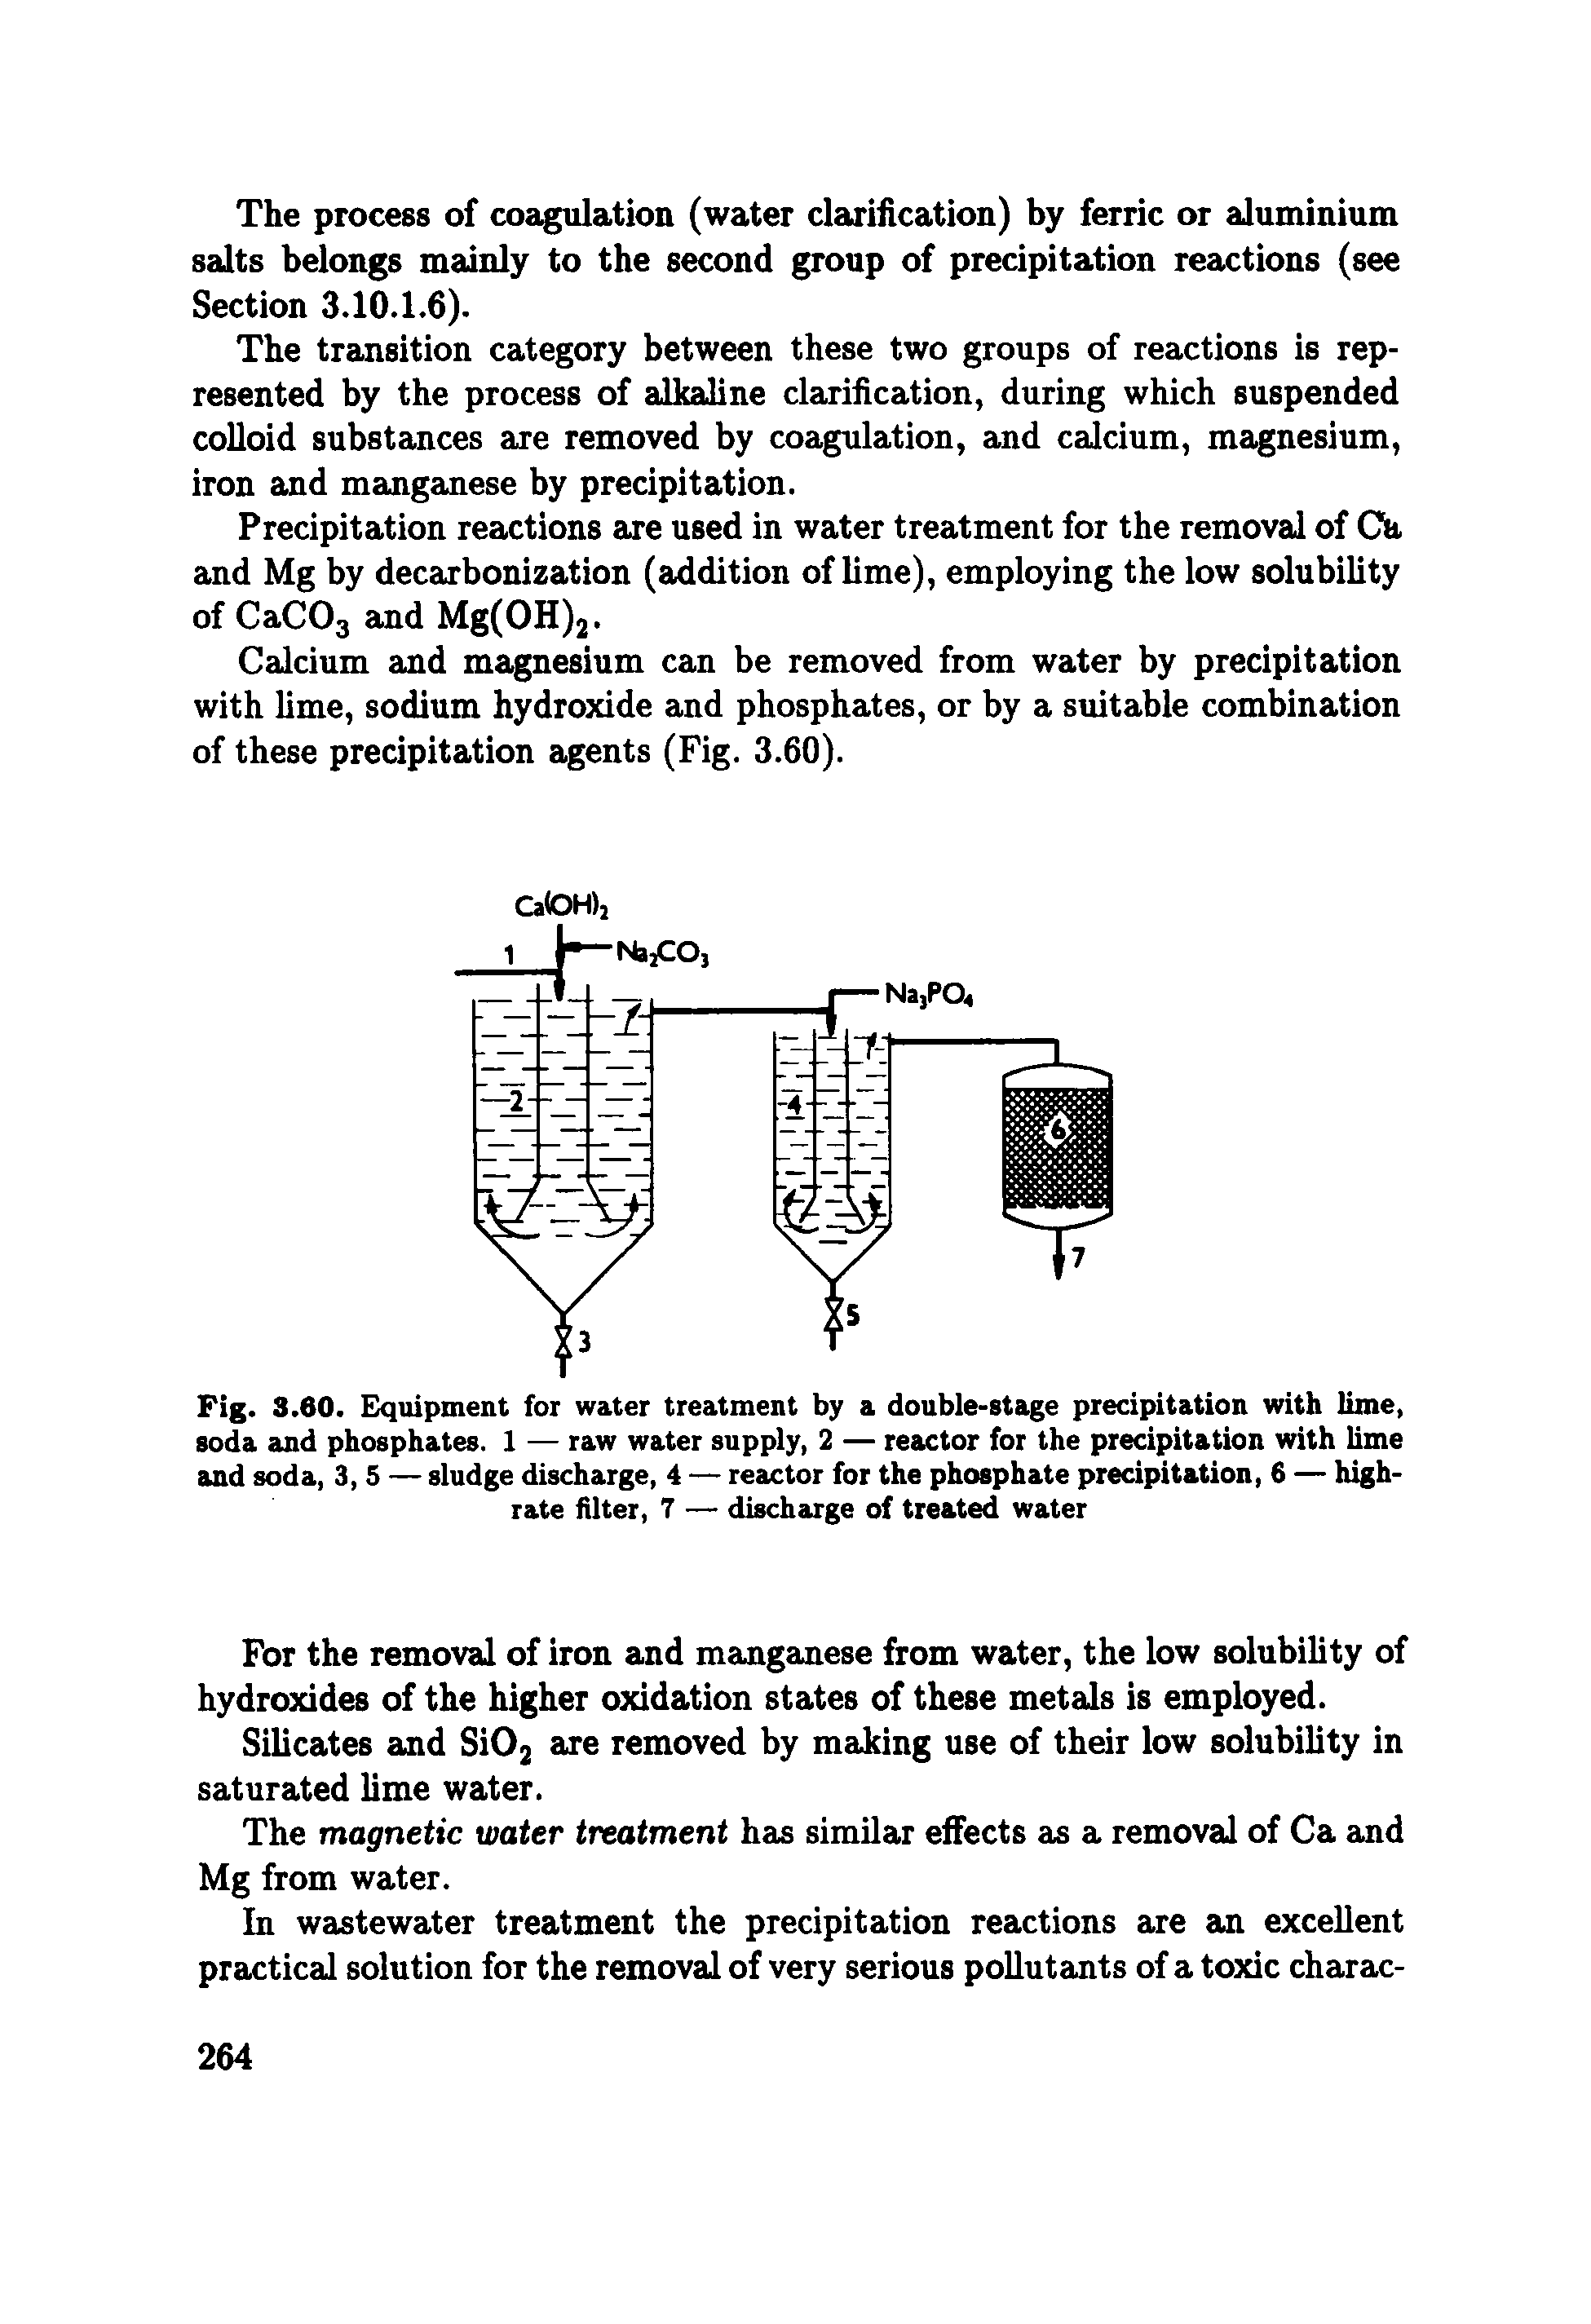 Fig. 3.60. E quipment for water treatment by a double-stage precipitation with lime, soda and phosphates. 1 — raw water supply, 2 — reactor for the precipitation with lime and soda, 3,5 — sludge discharge, 4 — reactor for the phosphate precipitation, 6 — high-rate filter, 7 — discharge of treated water...